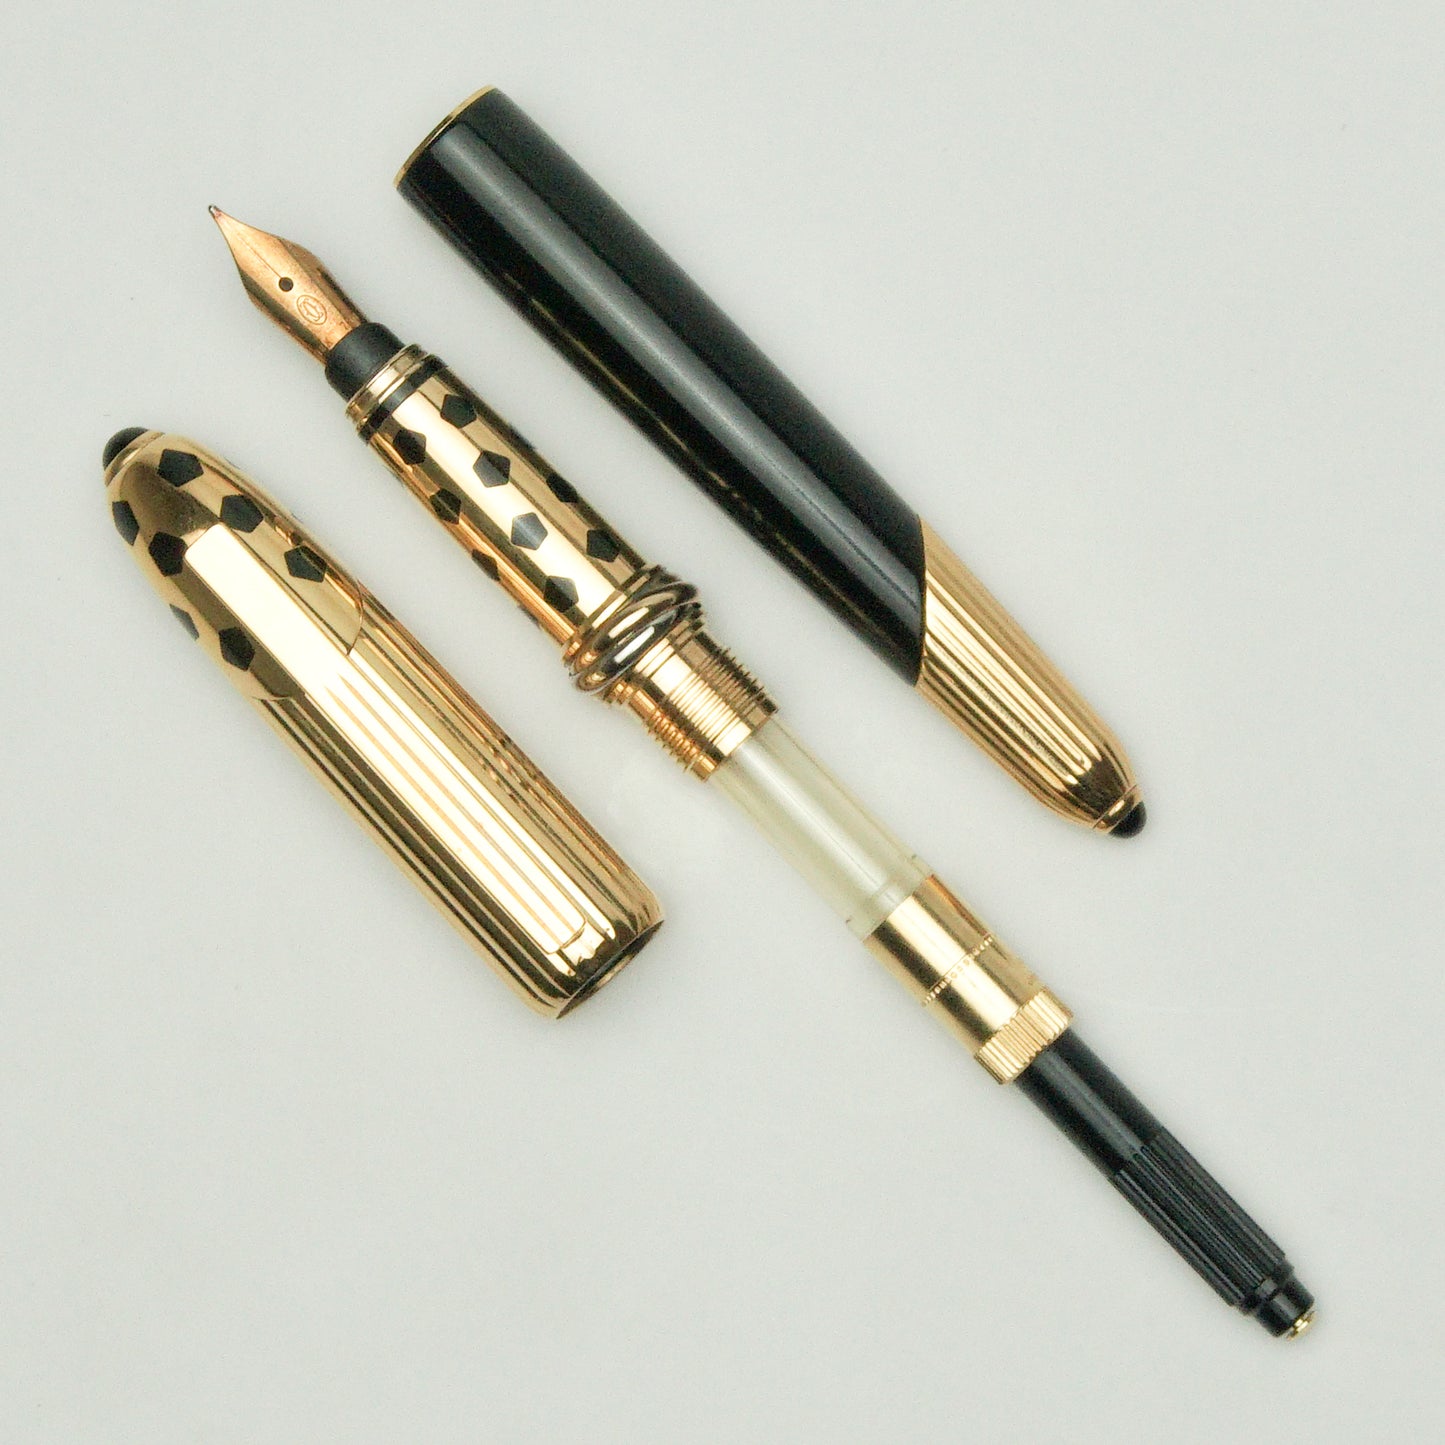 CARTIER PANTHERE BLACK LACQUER GOLDPLATED FOUNTAIN PEN (1990)